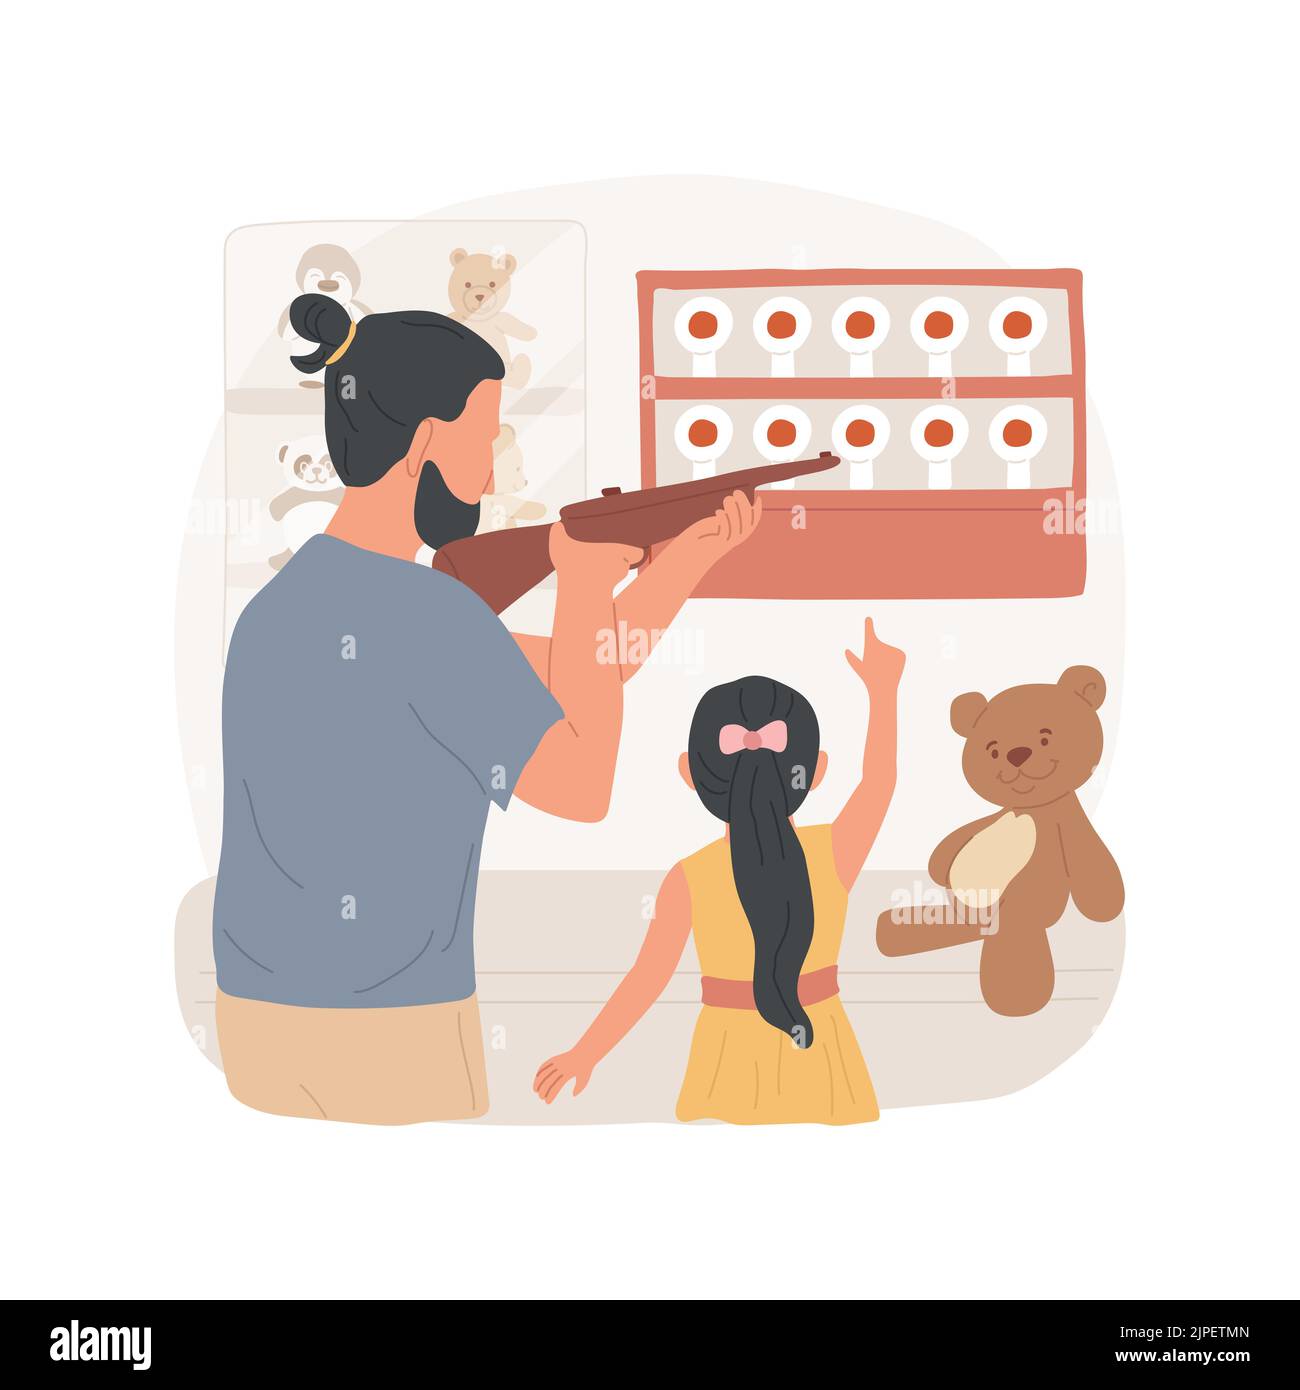 Shooting gallery isolated cartoon vector illustration. Funfair riffle shooting gallery, father wins toy for kid, man aiming, stuffed animals in a booth, amusement park activity vector cartoon. Stock Vector